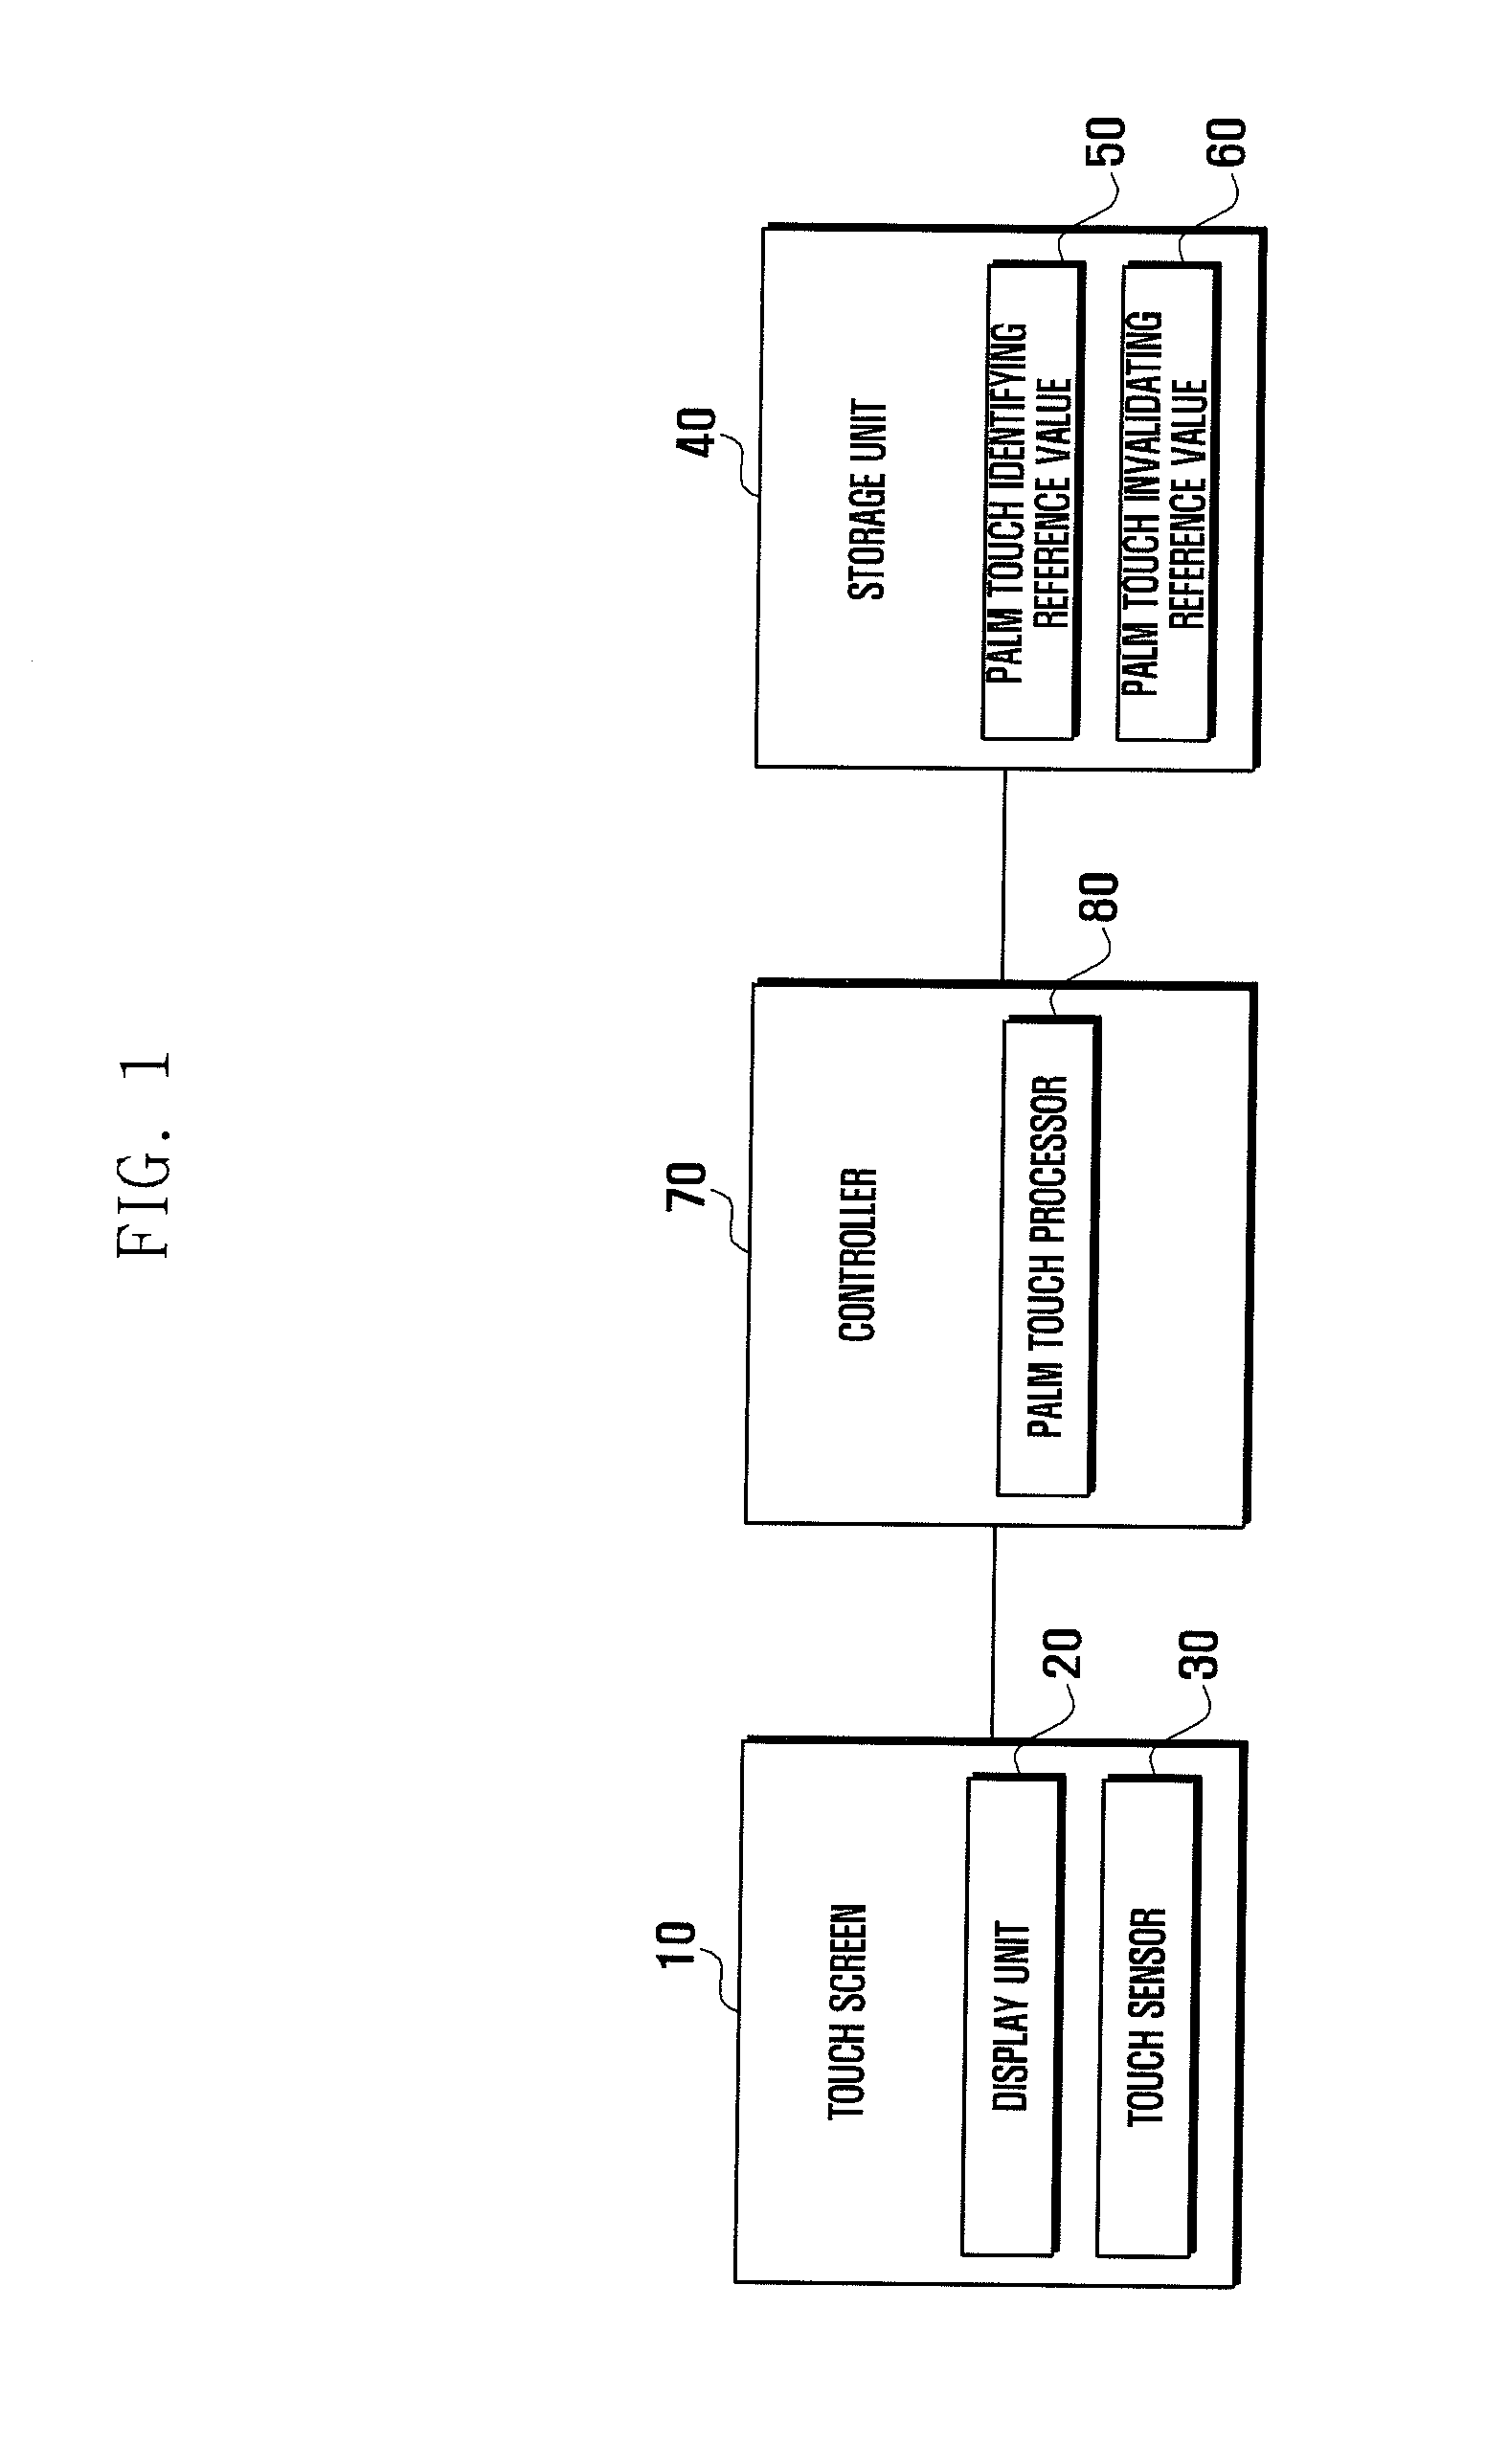 Method and apparatus for recognizing a pen touch in a device